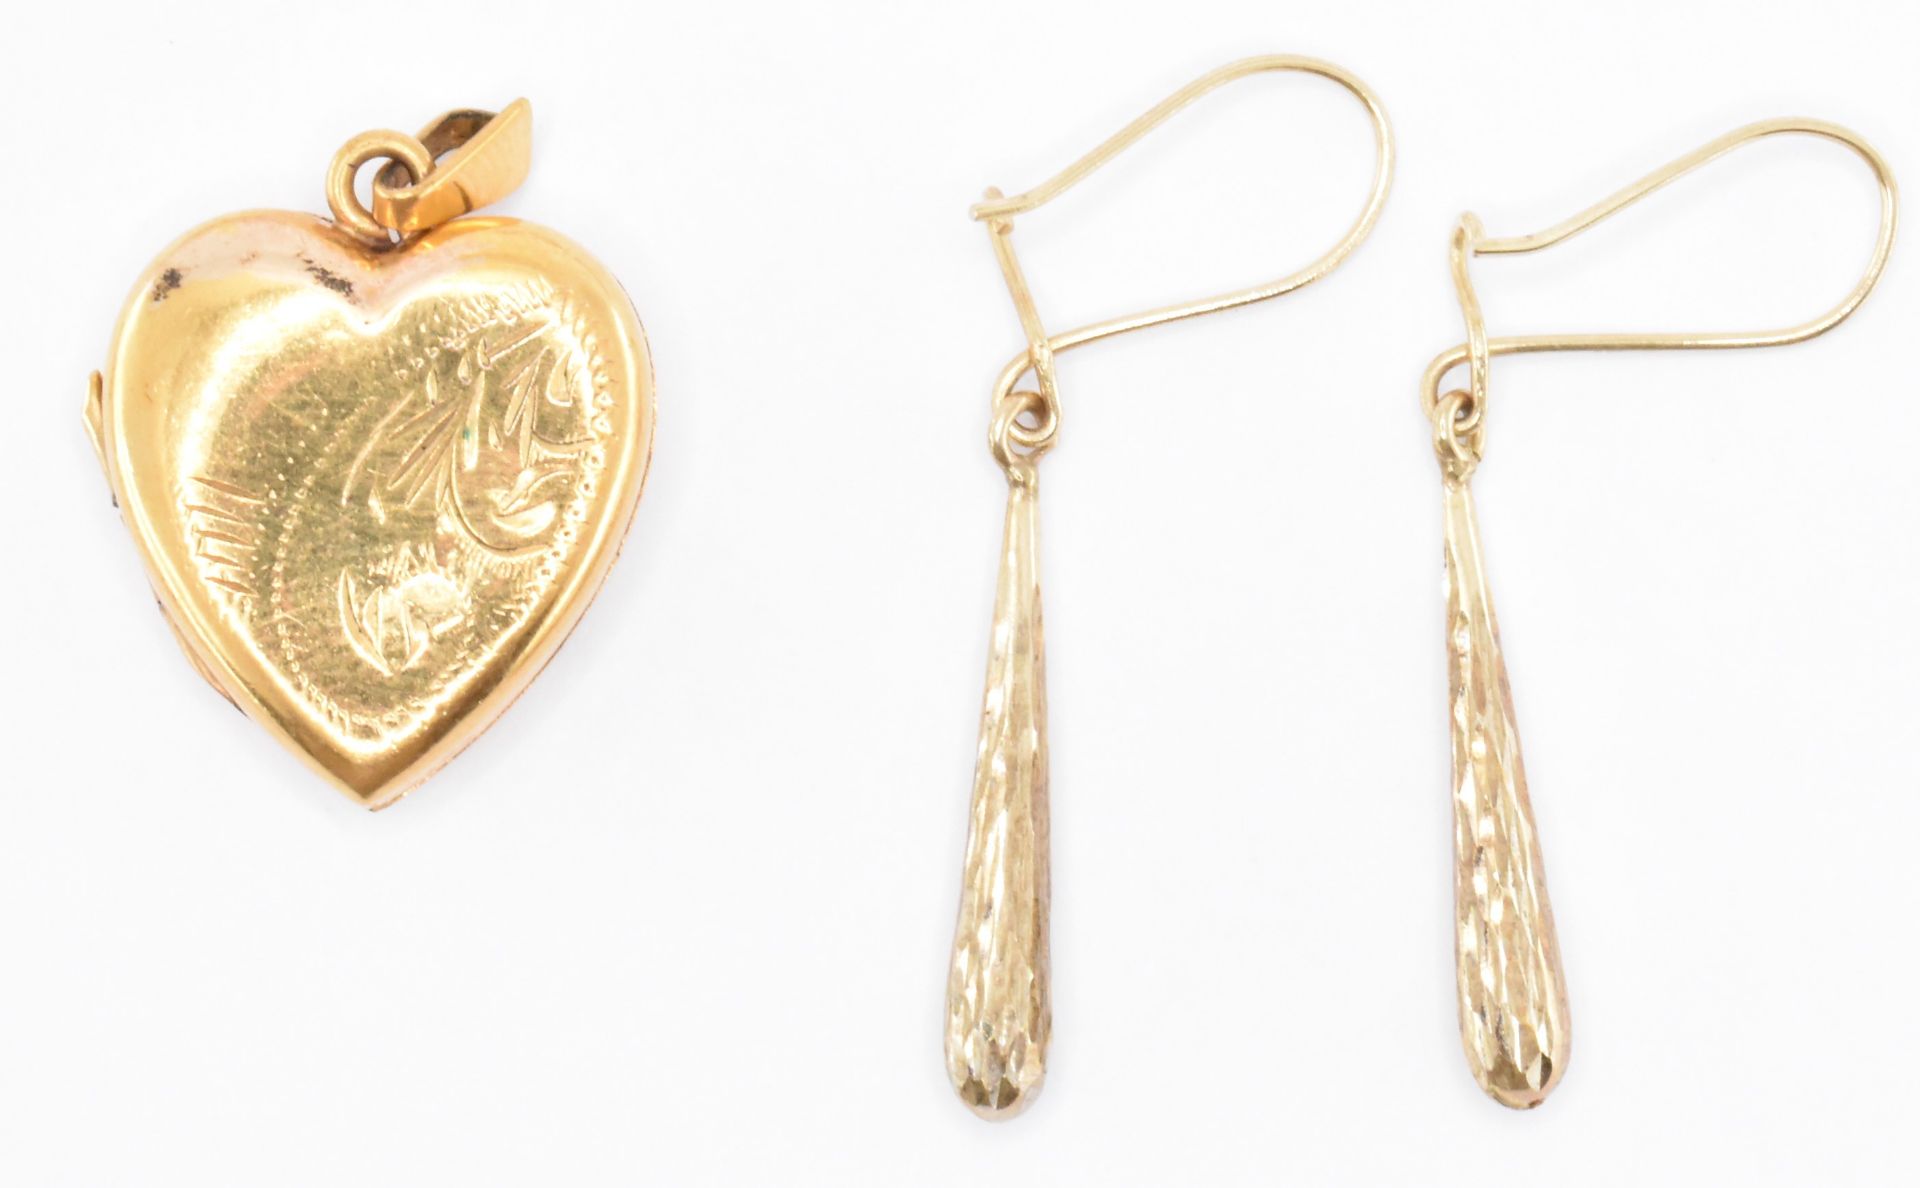 FOUR PAIRS OF 9CT GOLD EARRINGS - Image 4 of 5